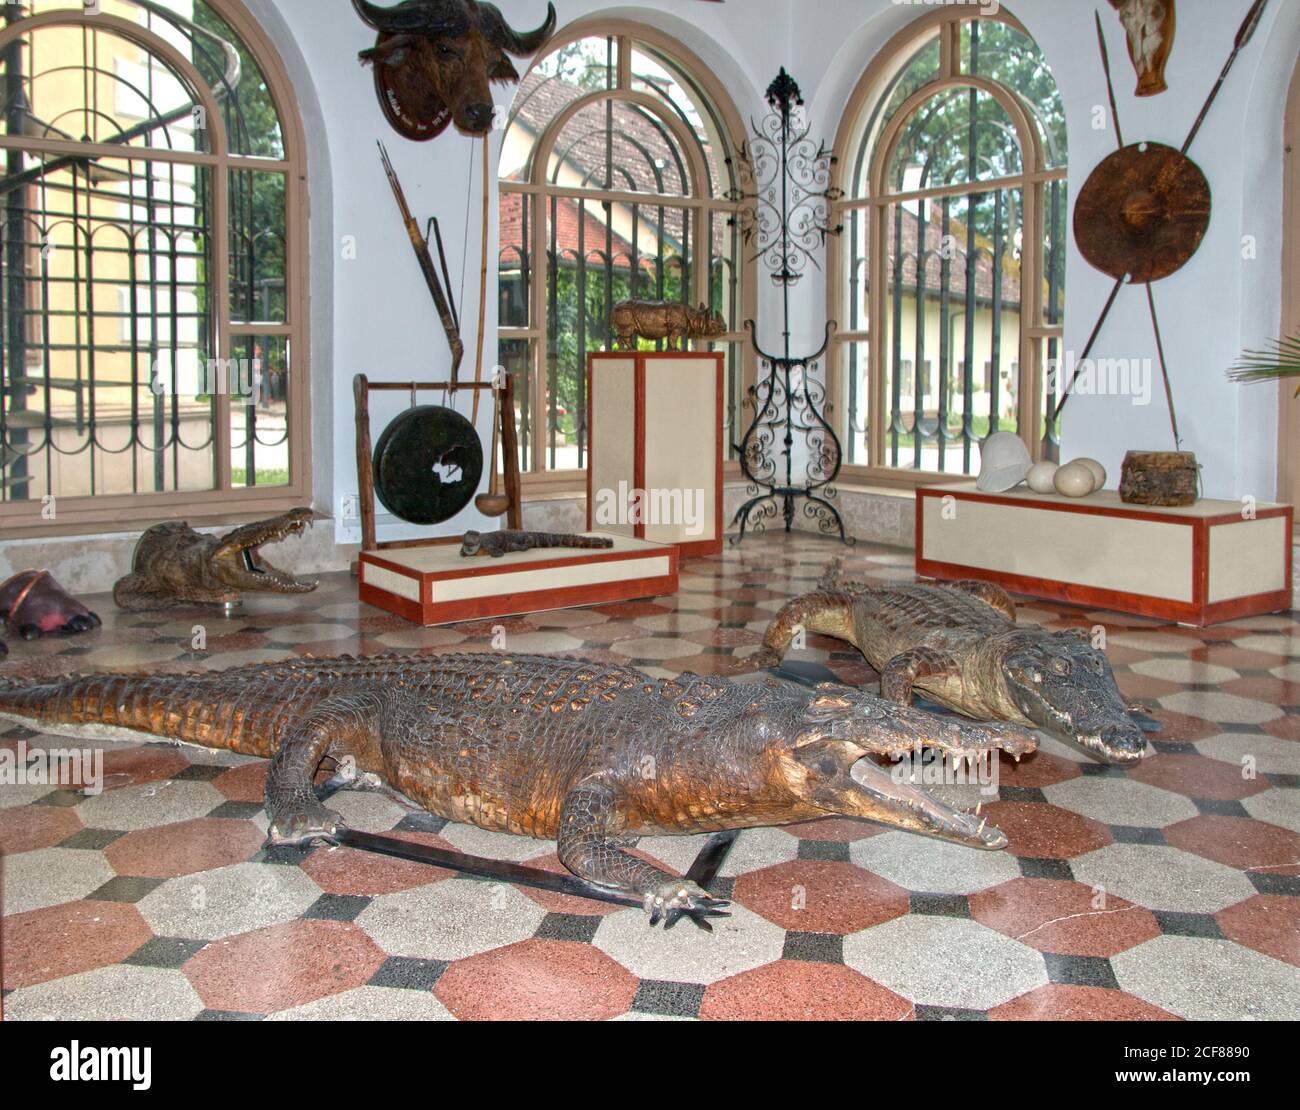 Dangerous reptiles with pointed, sharpened teeth in the conservatory of Count Gyula Andrássy's former hunting castle. Stock Photo